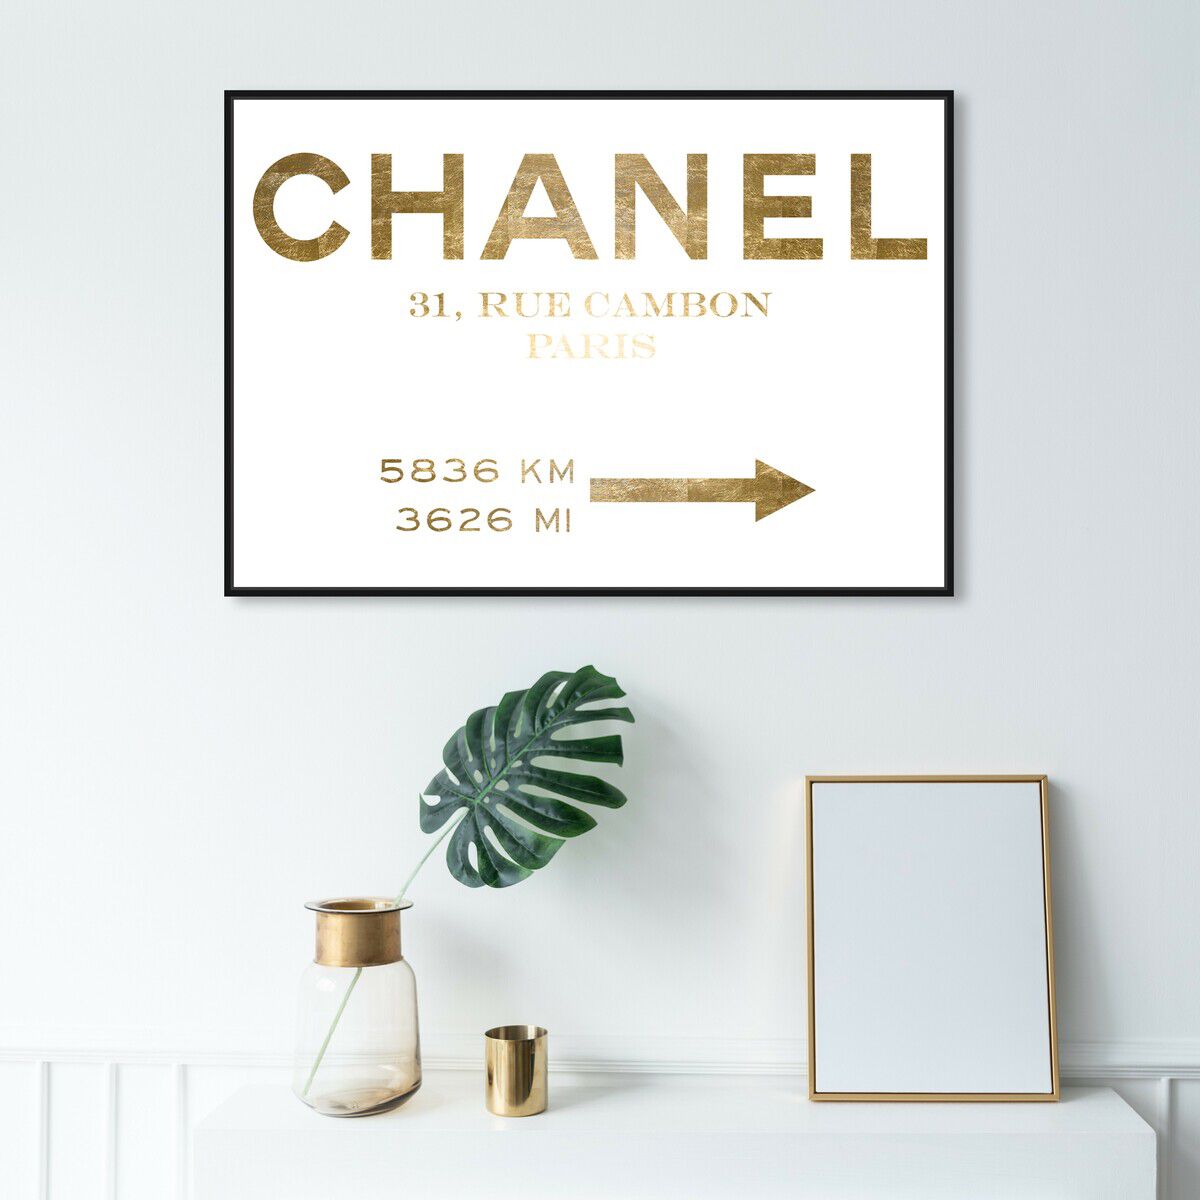 Couture Road Sign Minimalist Gold Foil